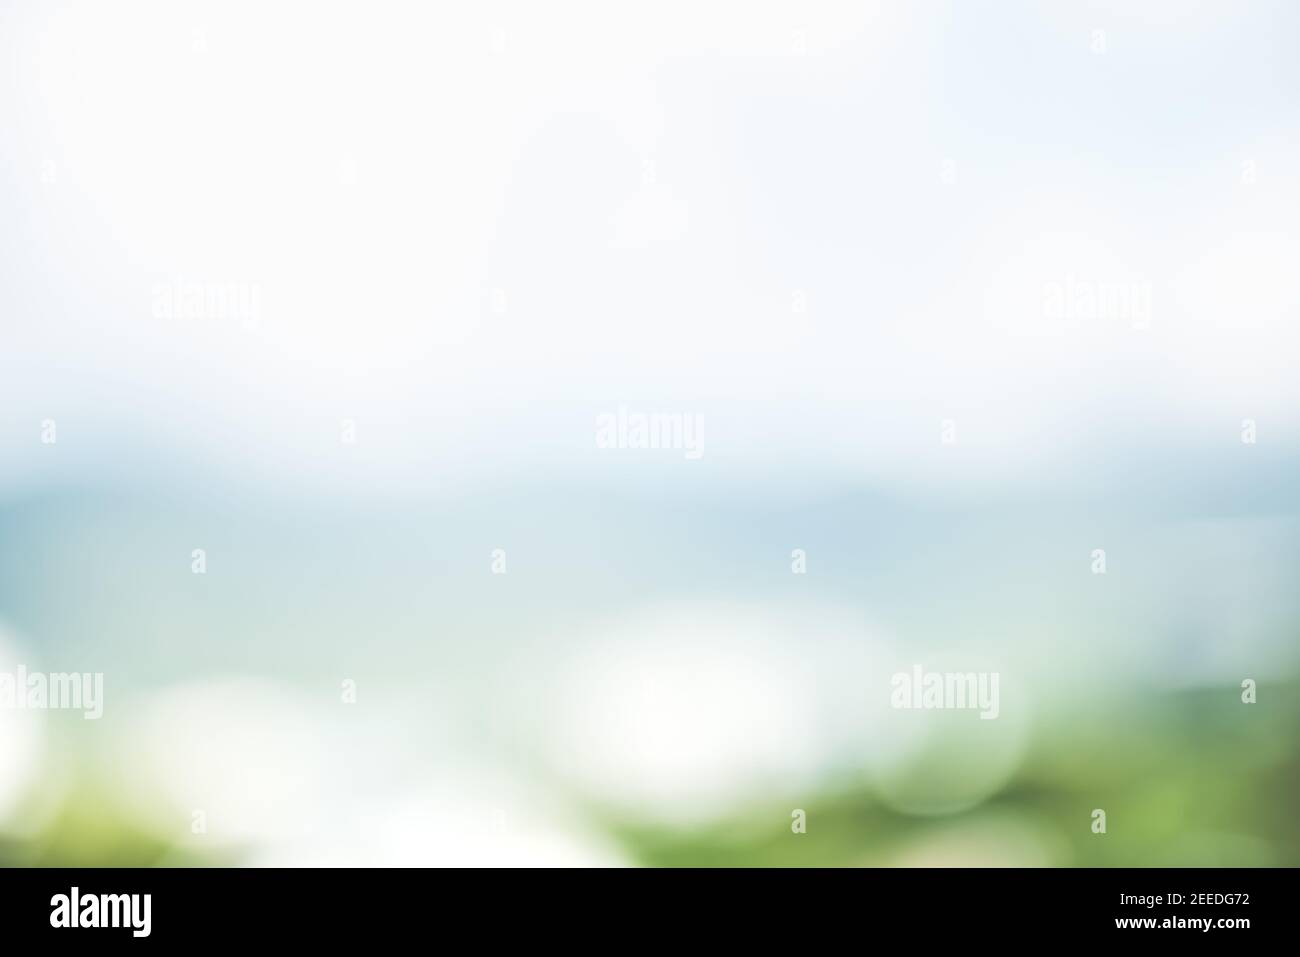 Abstract simple clean natural blur white green bokeh background with light  blue shade in the middle Stock Photo - Alamy